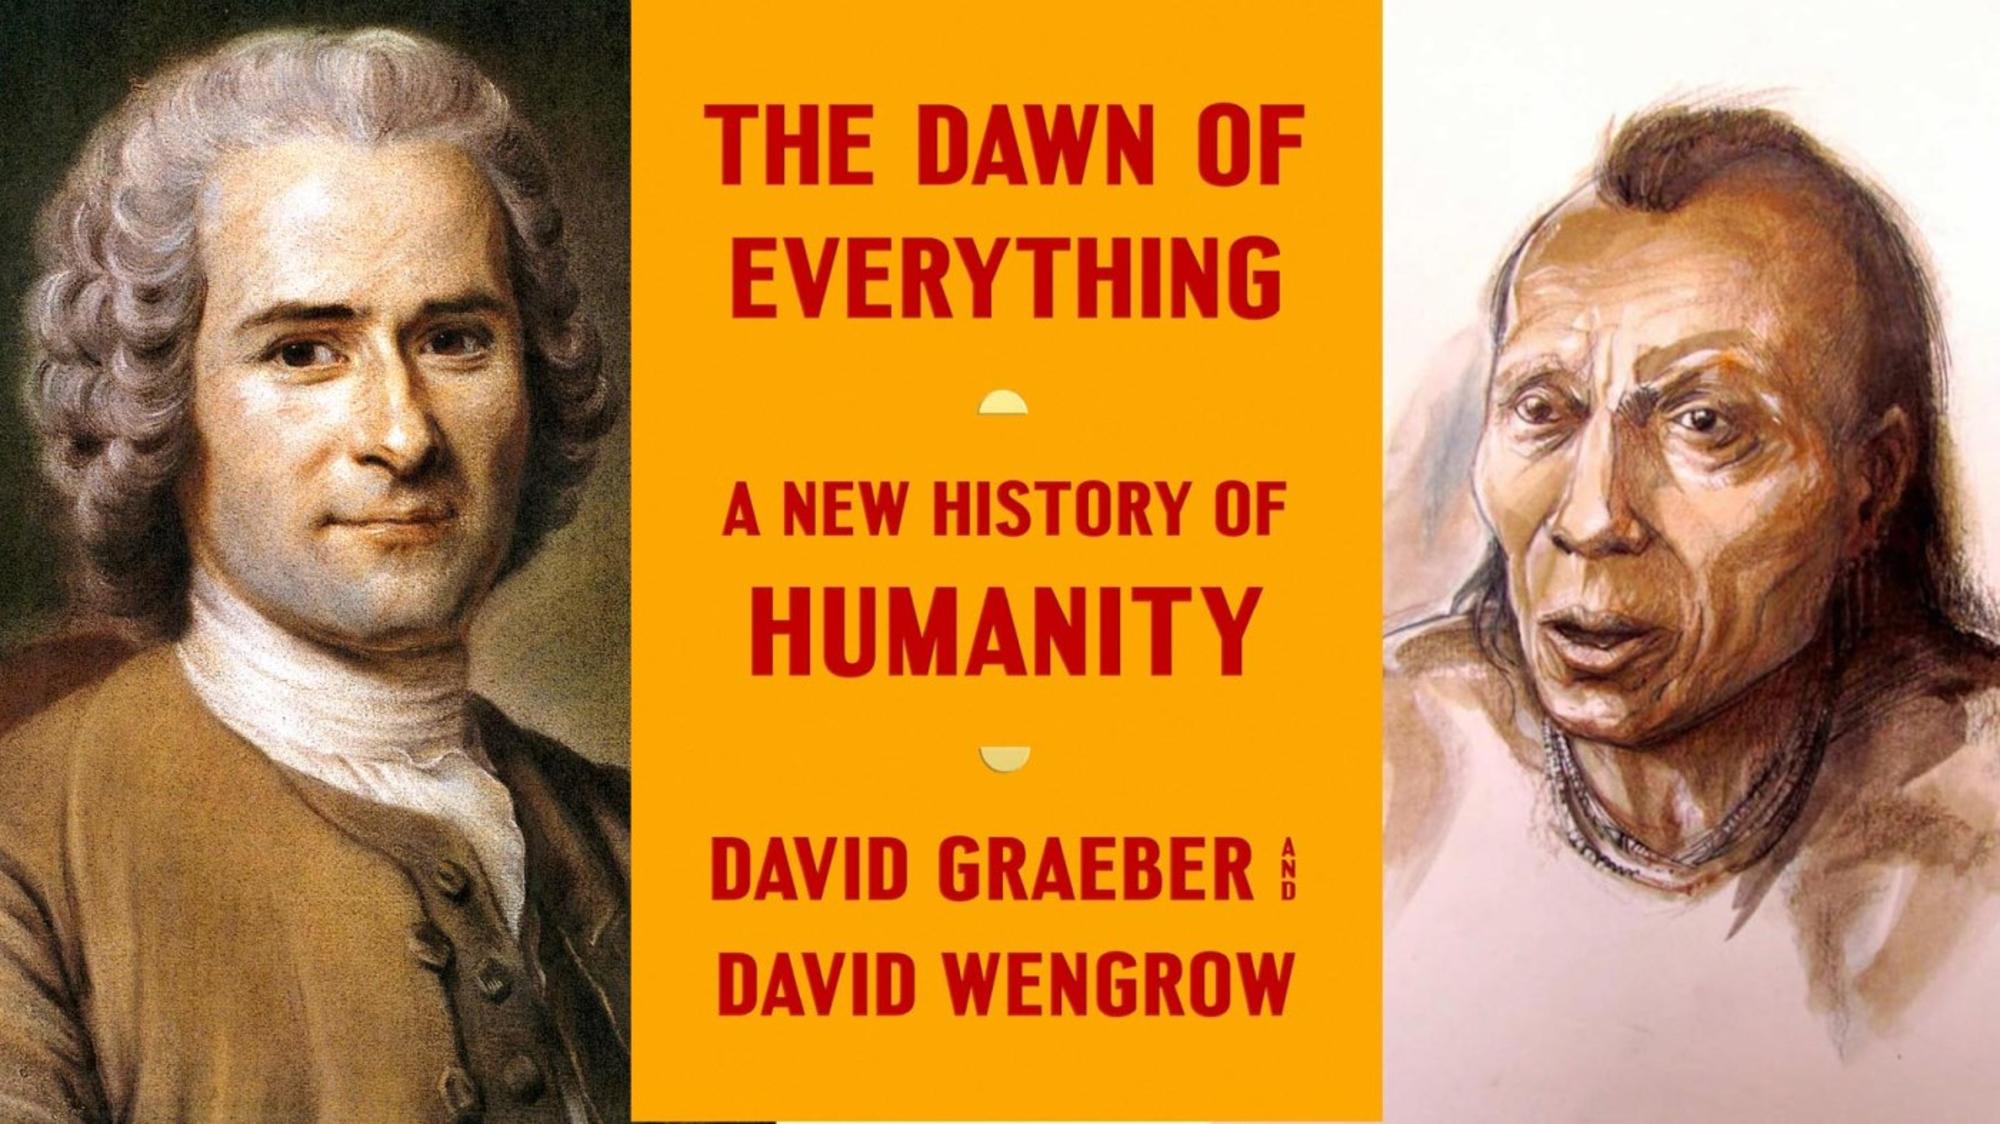 The dawn of everything. Graeber-Wengrow